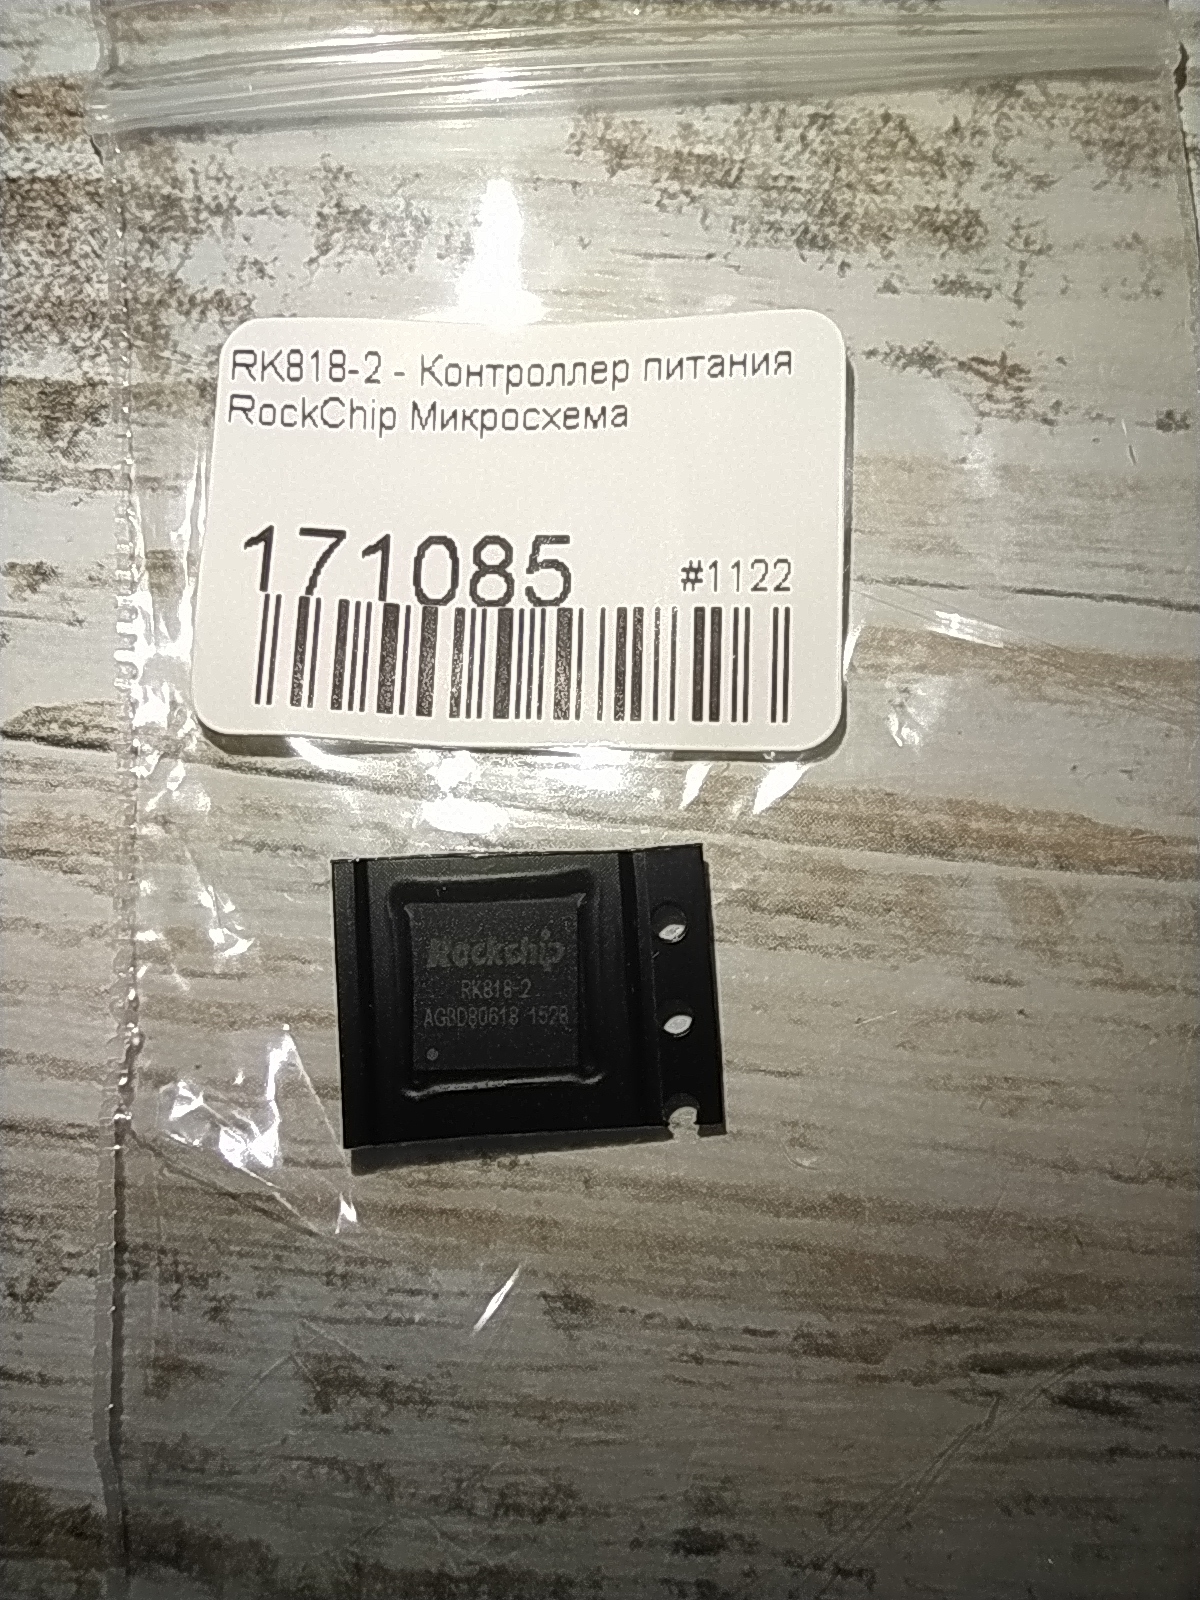 DEXP Ursus NS310 replacement for RK818-2 microcontroller - My, Dexp, Smd-Technology, Battery, Charger, Intel, Repair, Longpost